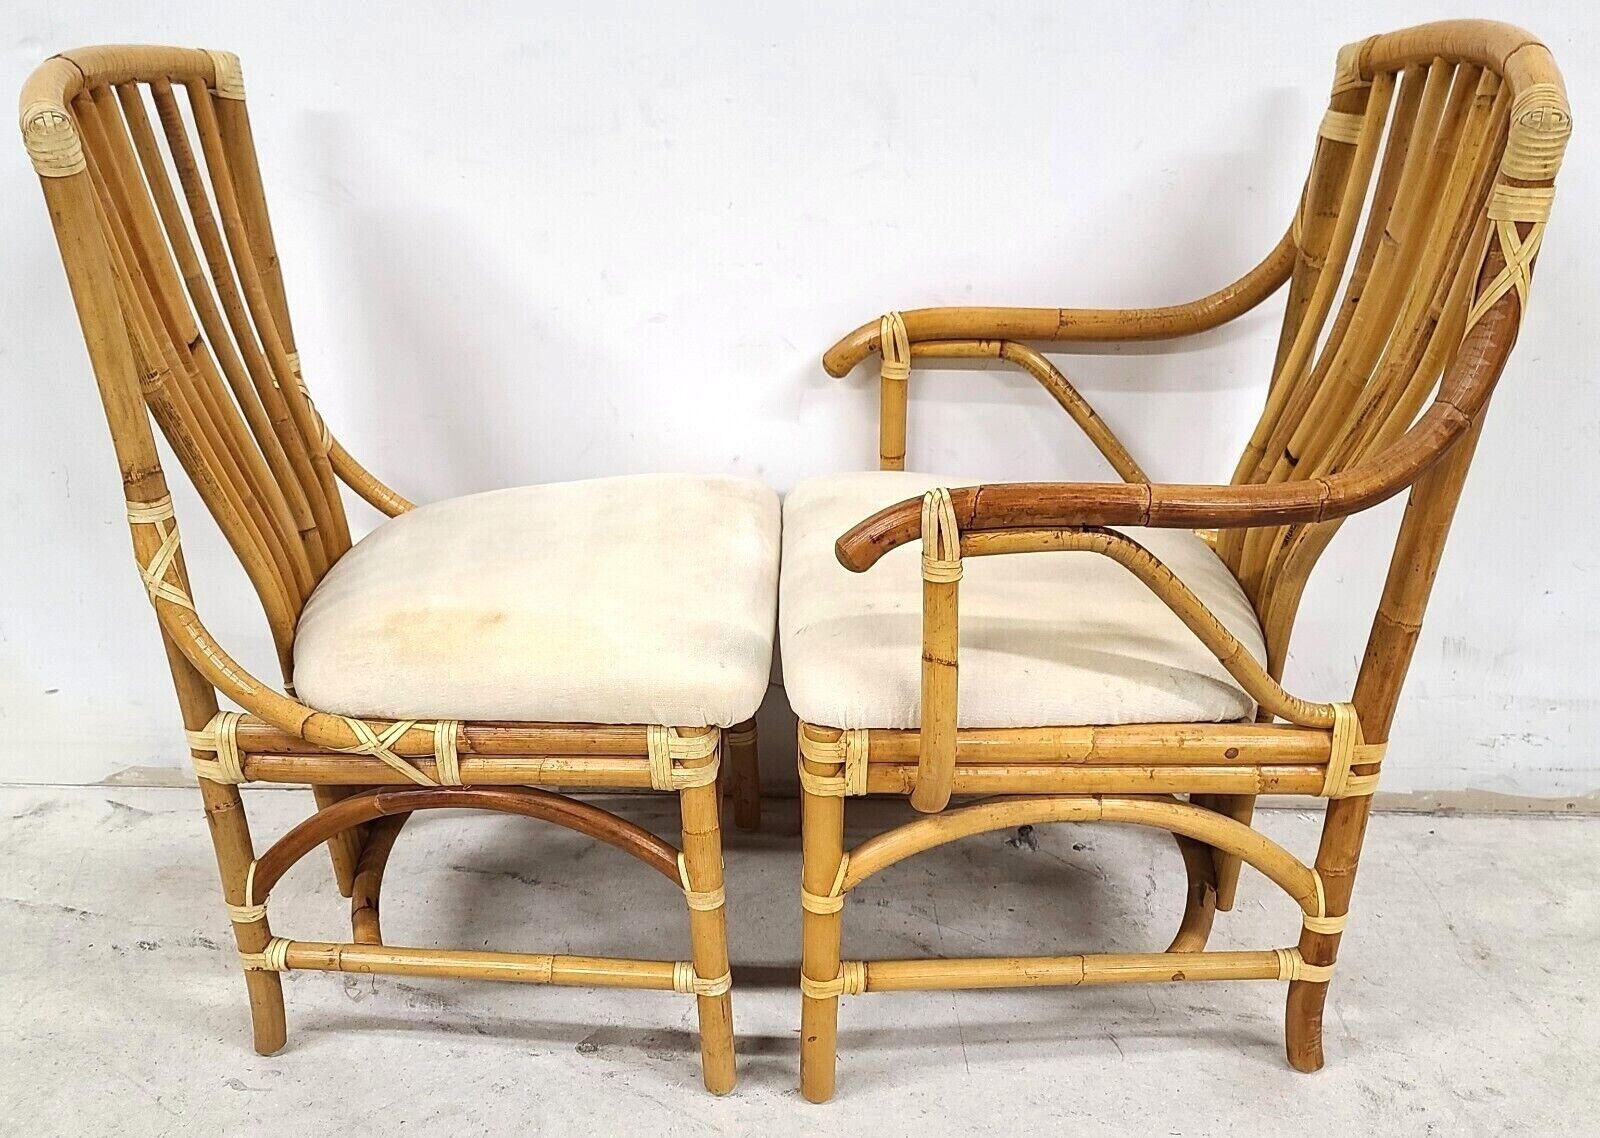 Vintage 1970s Bamboo Rattan Chairs, Set of 4 For Sale 2